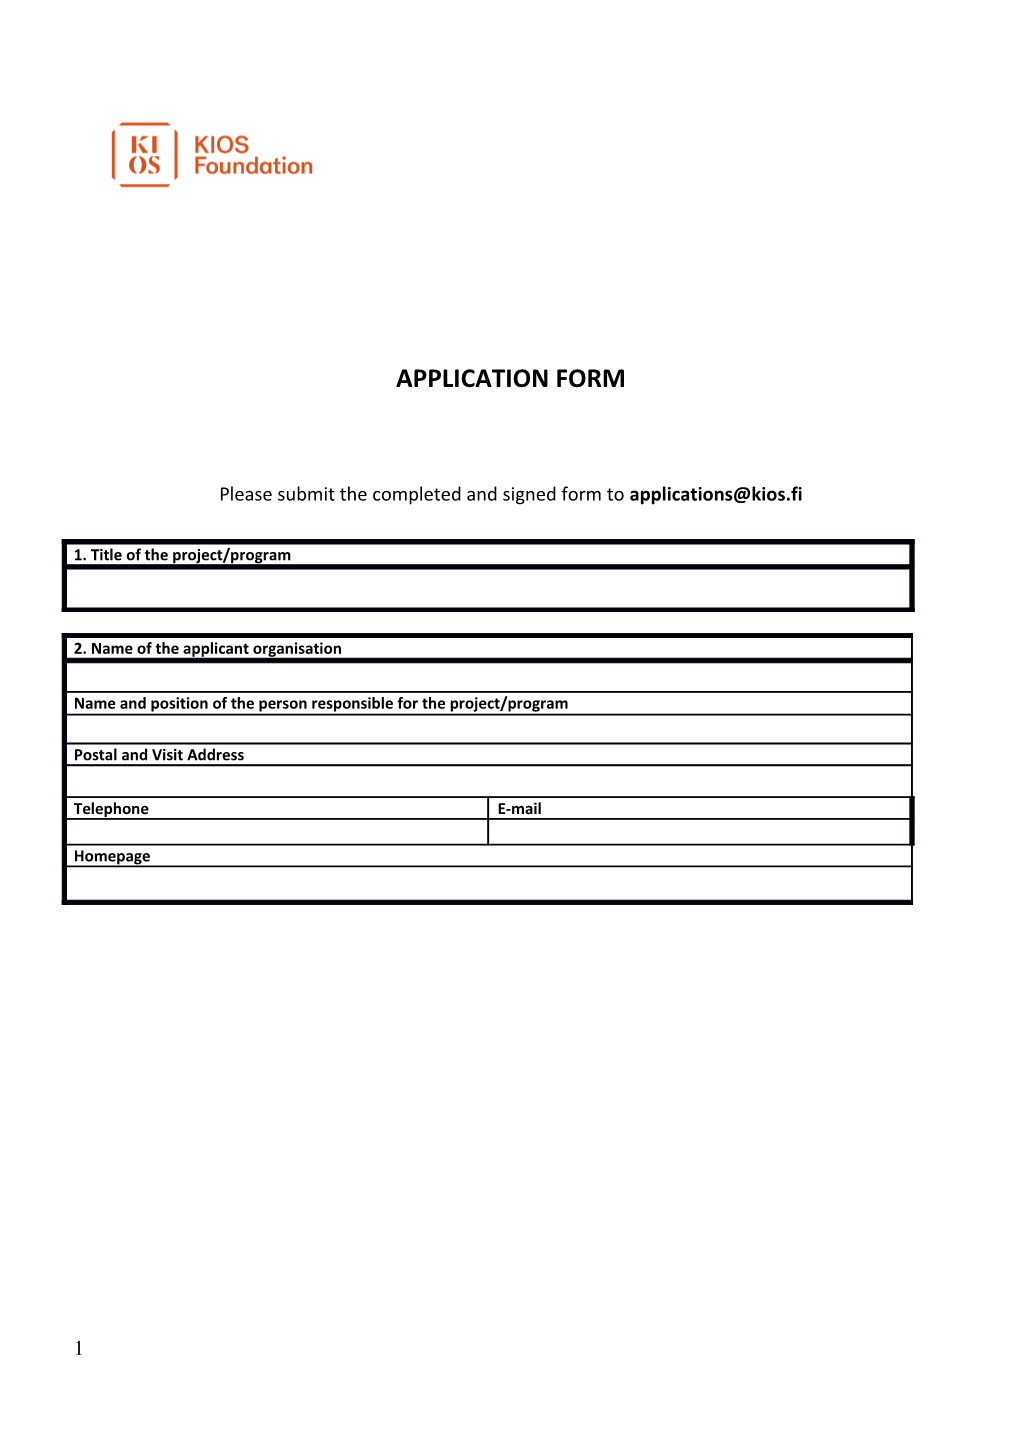 Please Submit the Completed and Signed Form To